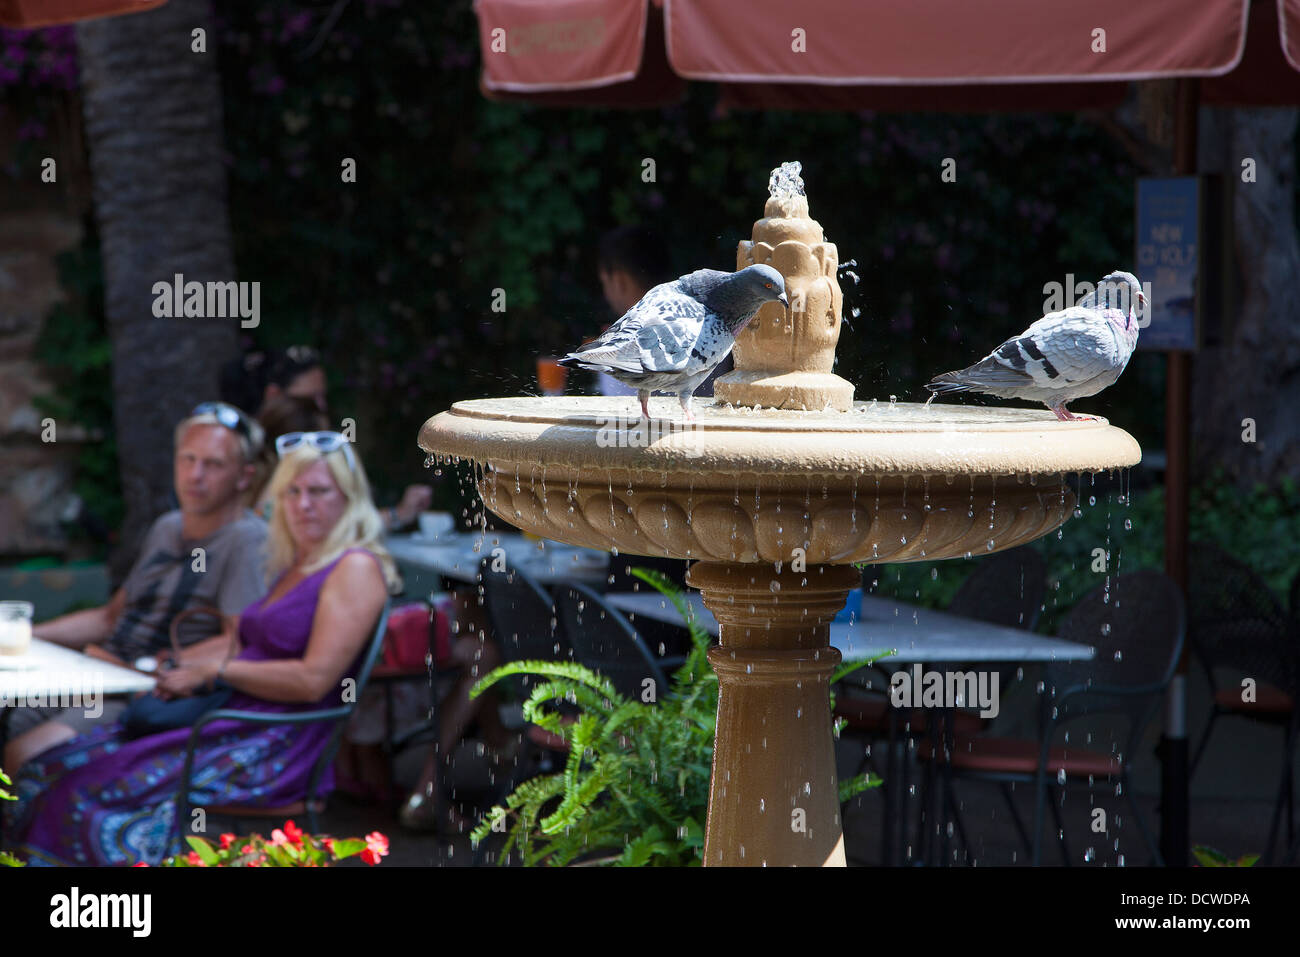 Tourist watching Pigeons in a street fountain in the city of Palma on the Balearic Island of Majorca Stock Photo